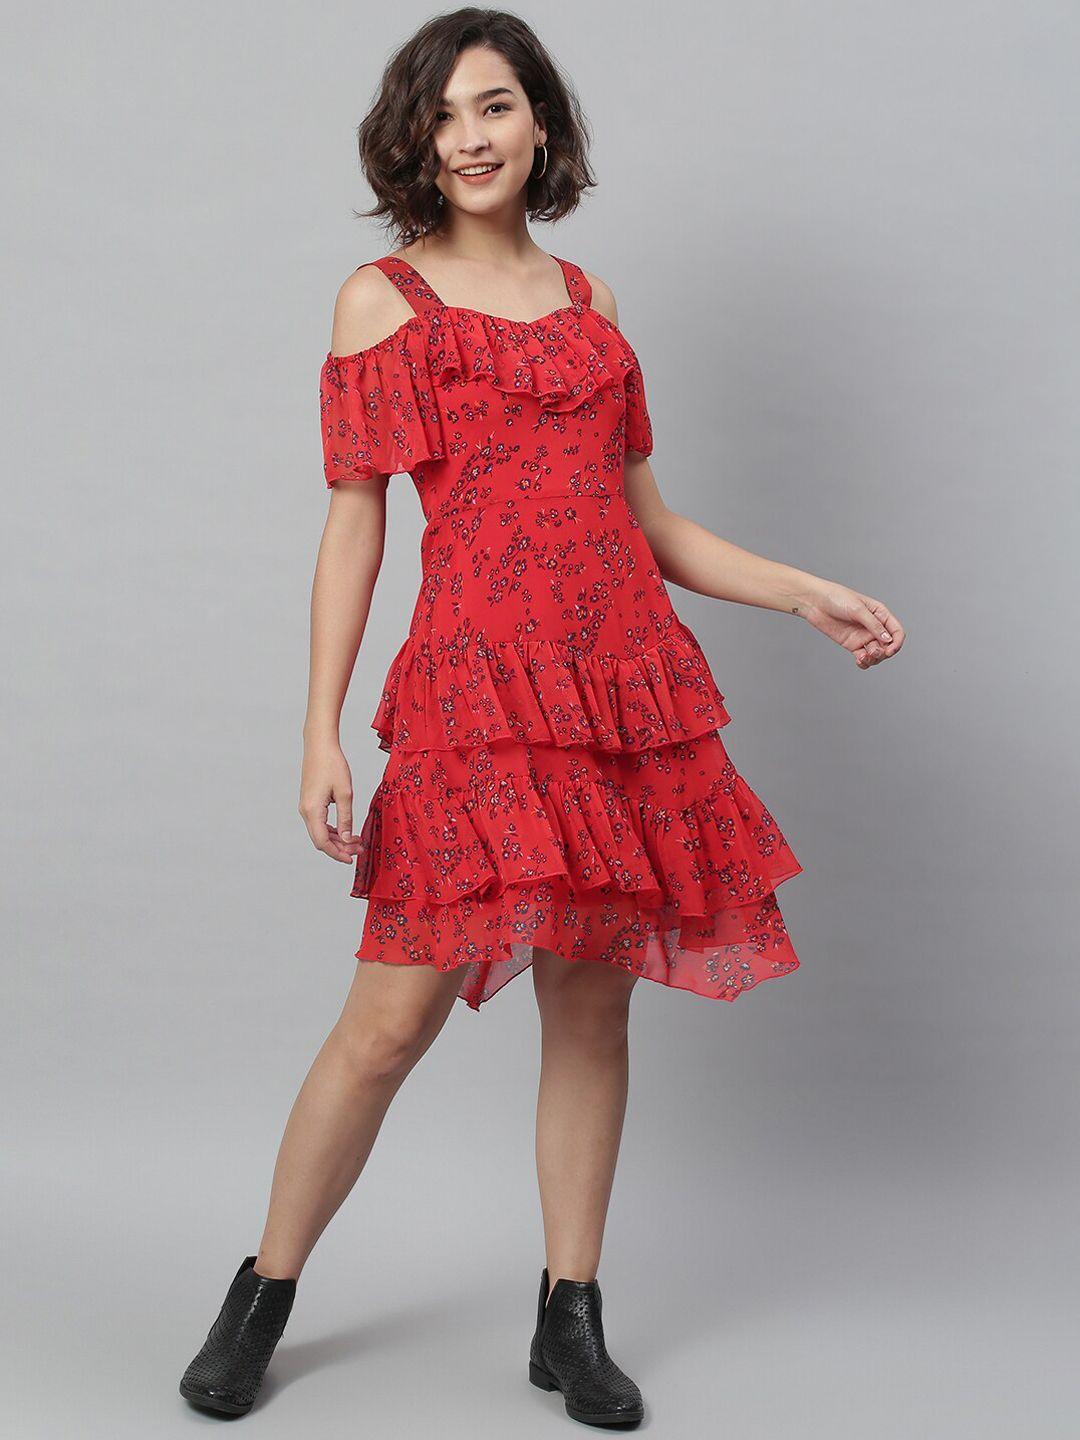 kassually red floral georgette dress